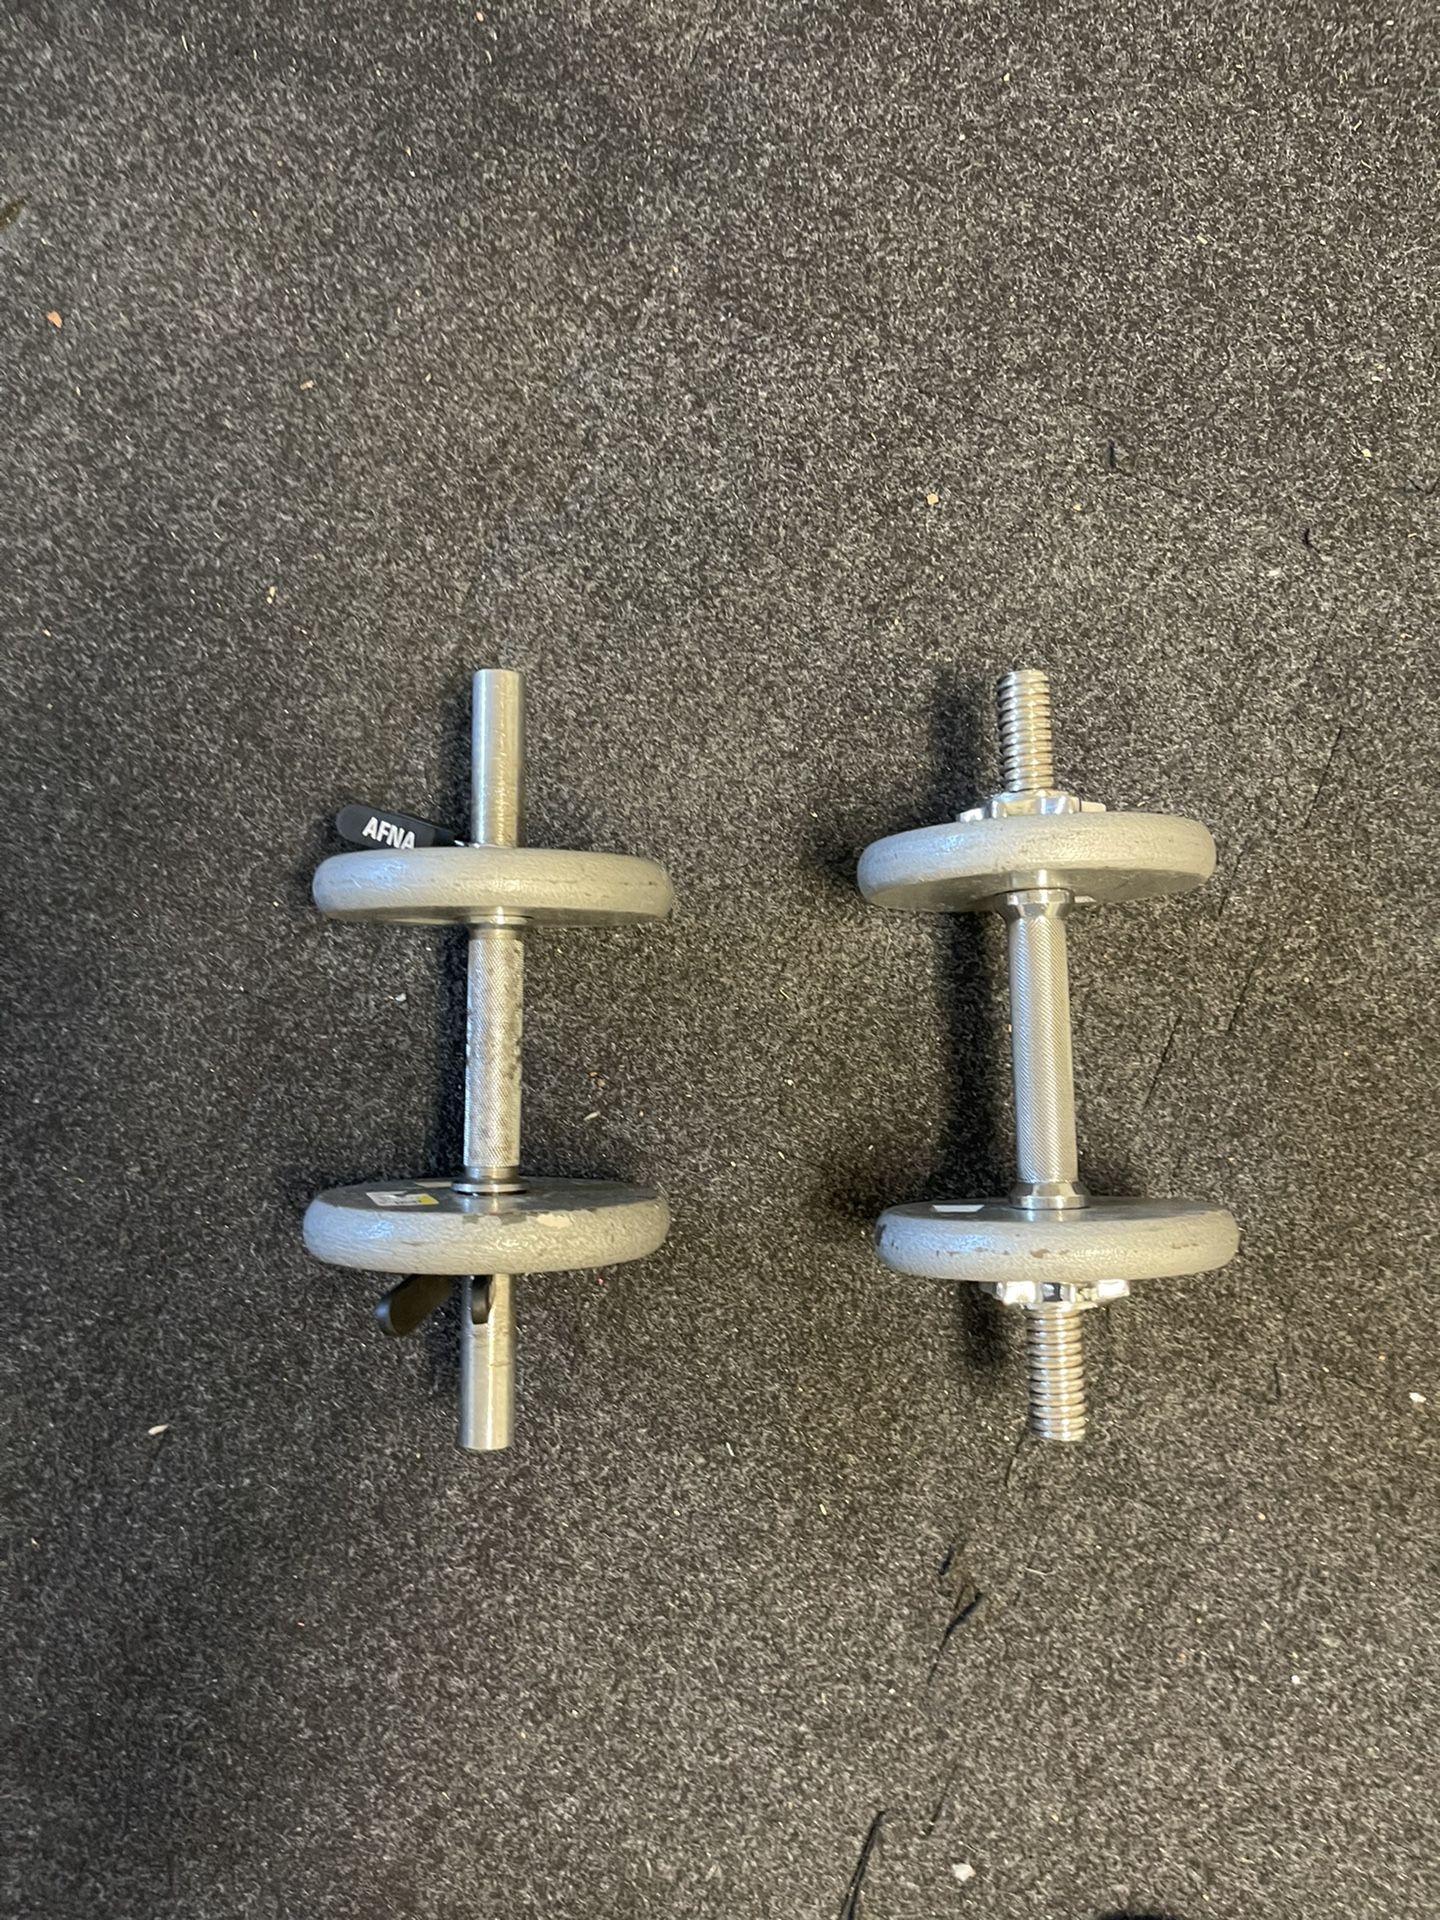 1 Inch Dumbbell Set With 2 7.5 Lb Weight Plates